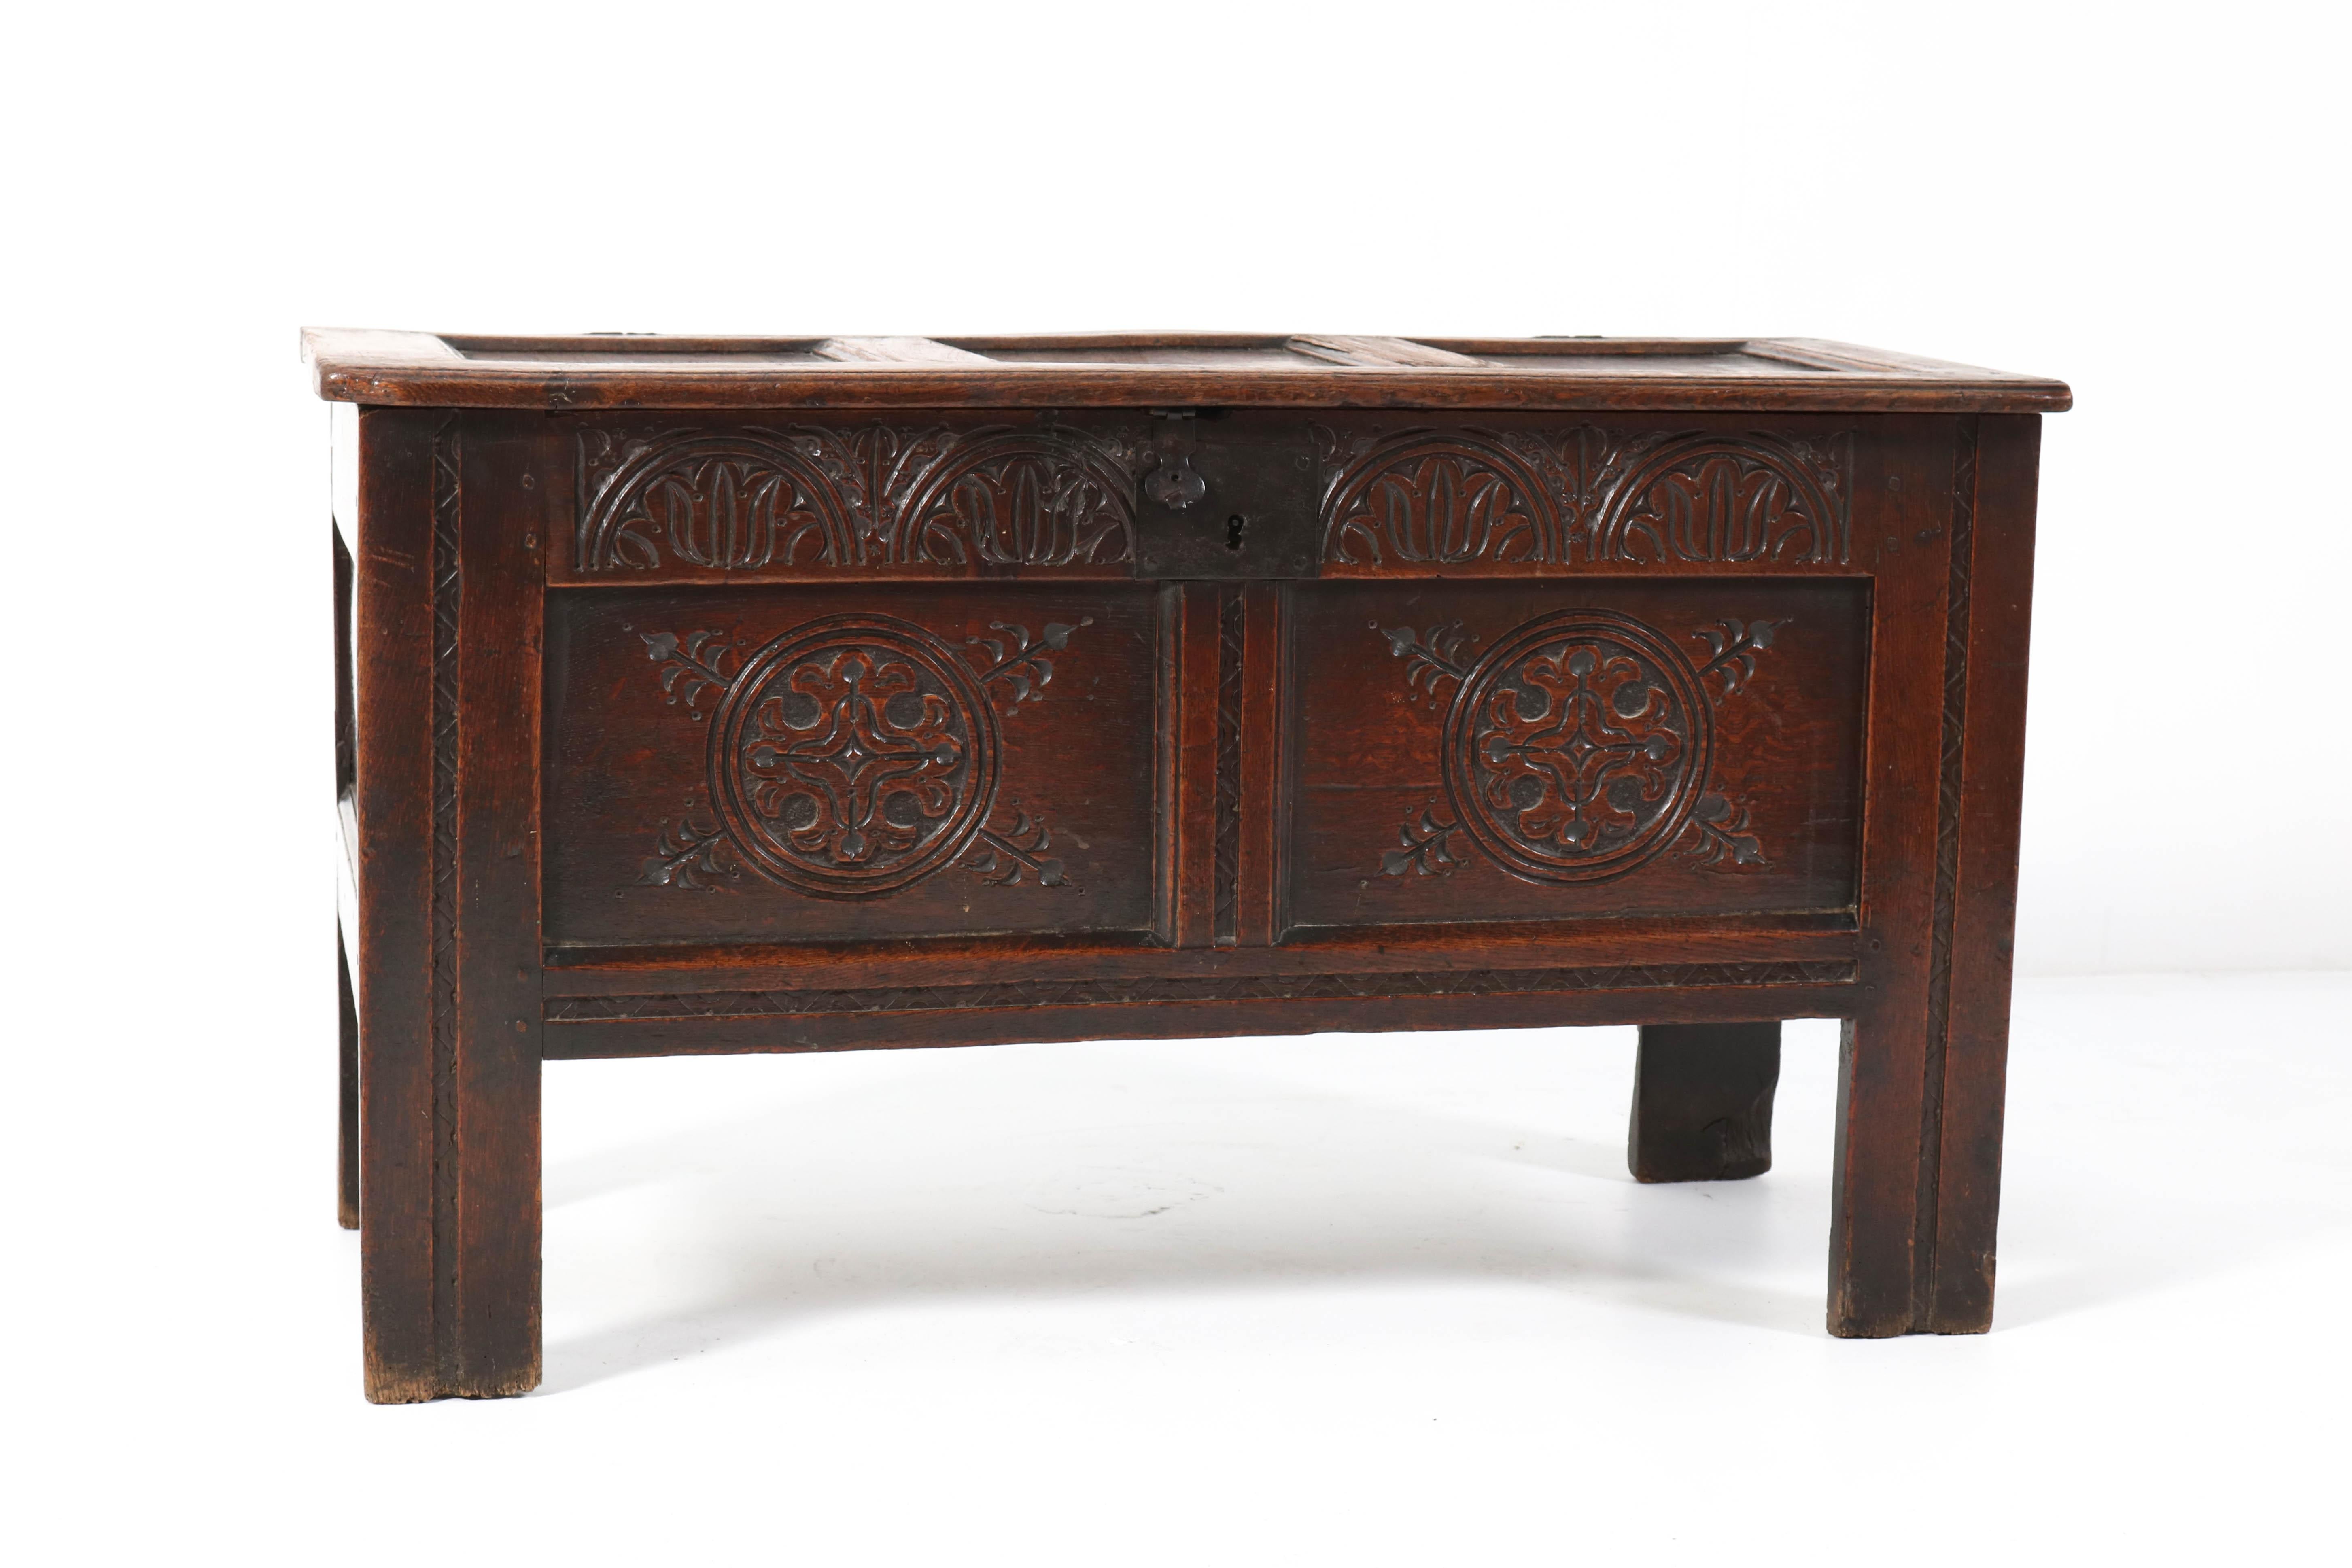 Georgian 18th Century English Carved Oak Blanket Chest or Coffer